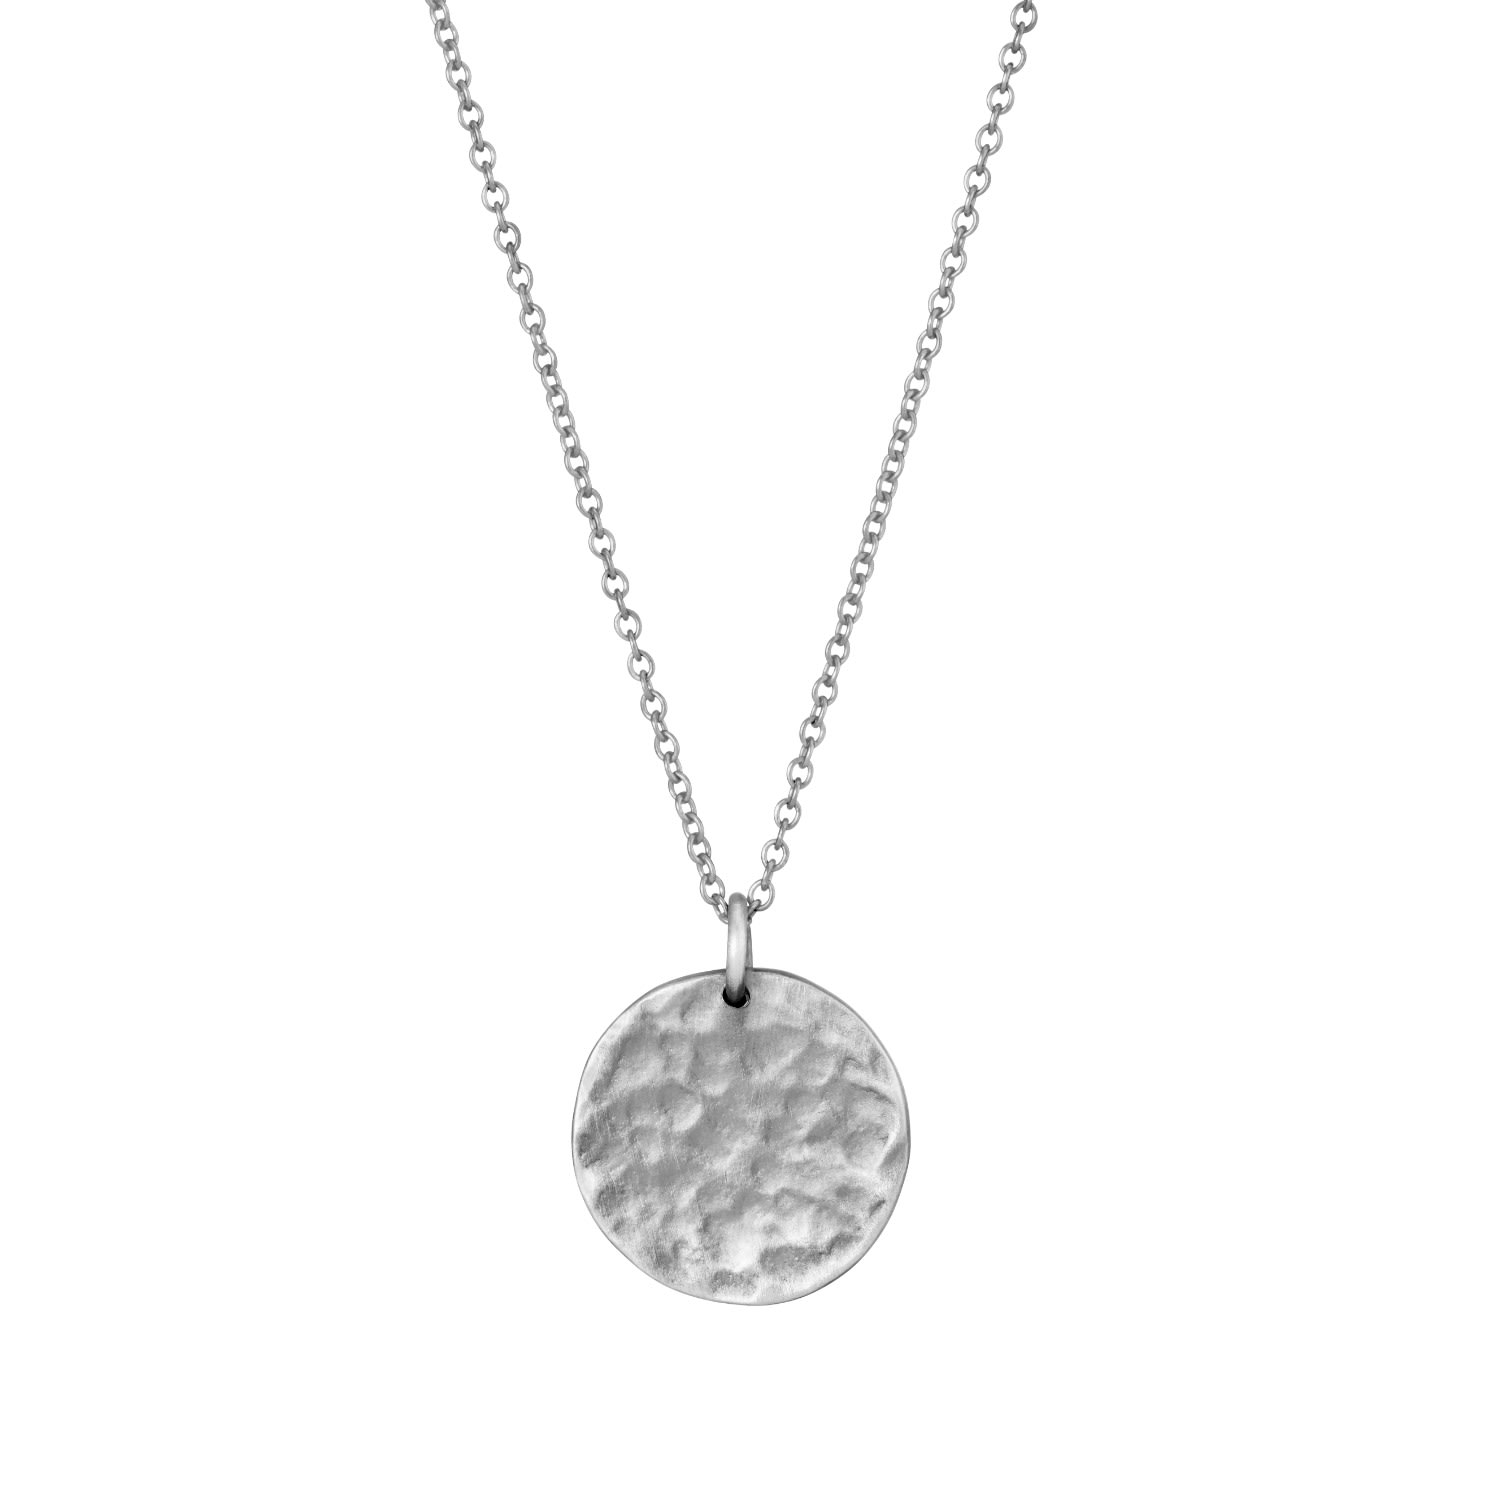 Men's Silver Textured Disc Necklace Posh Totty Designs